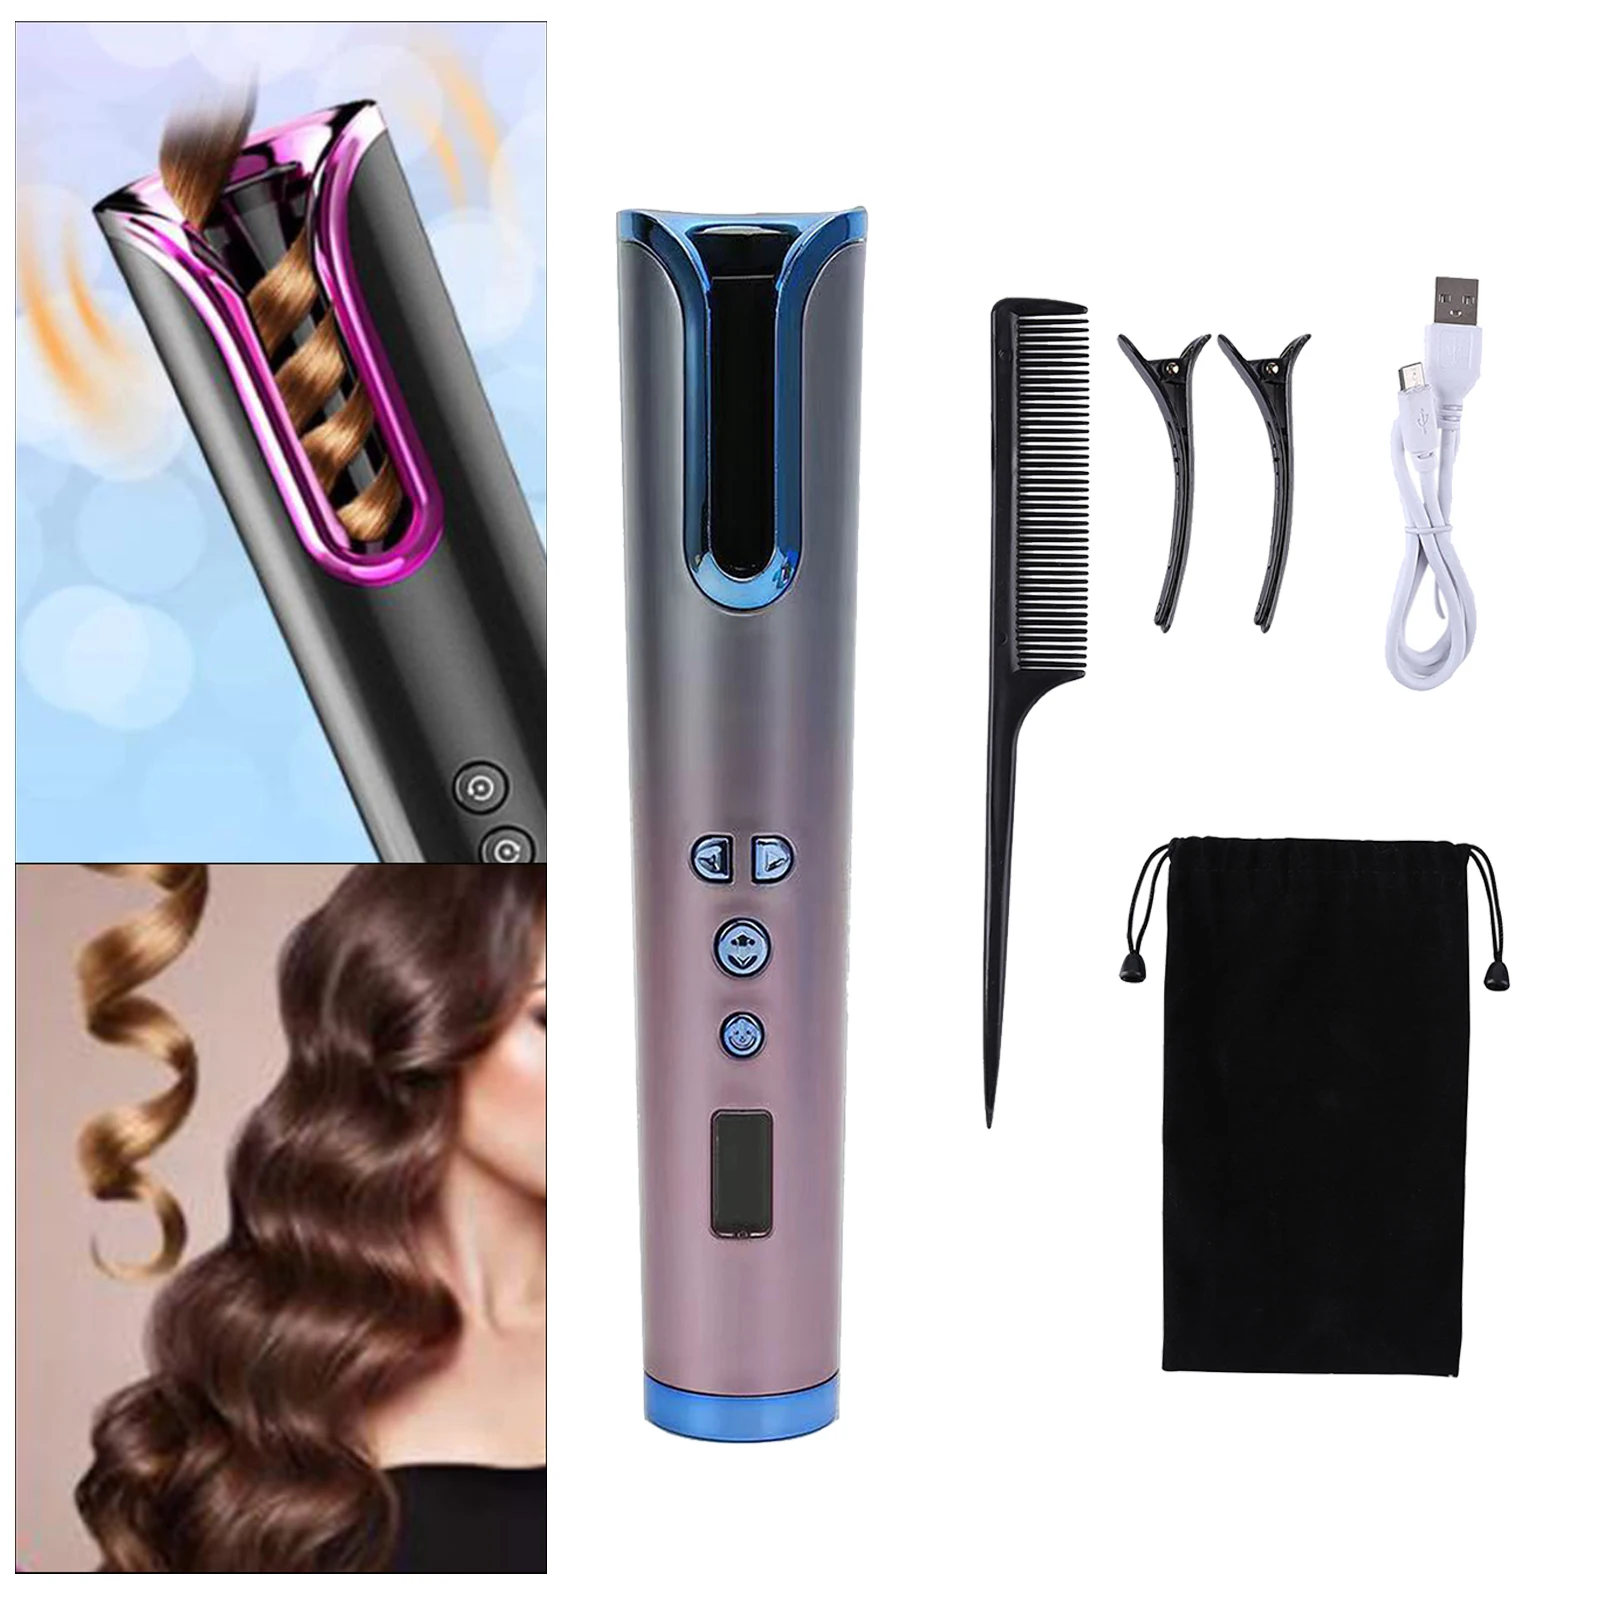 Cordless Automatic Hair Curler USB Rechargeable Curling Wand Auto Shut-Off Fast Heating 6 Temperature Wireless Curling